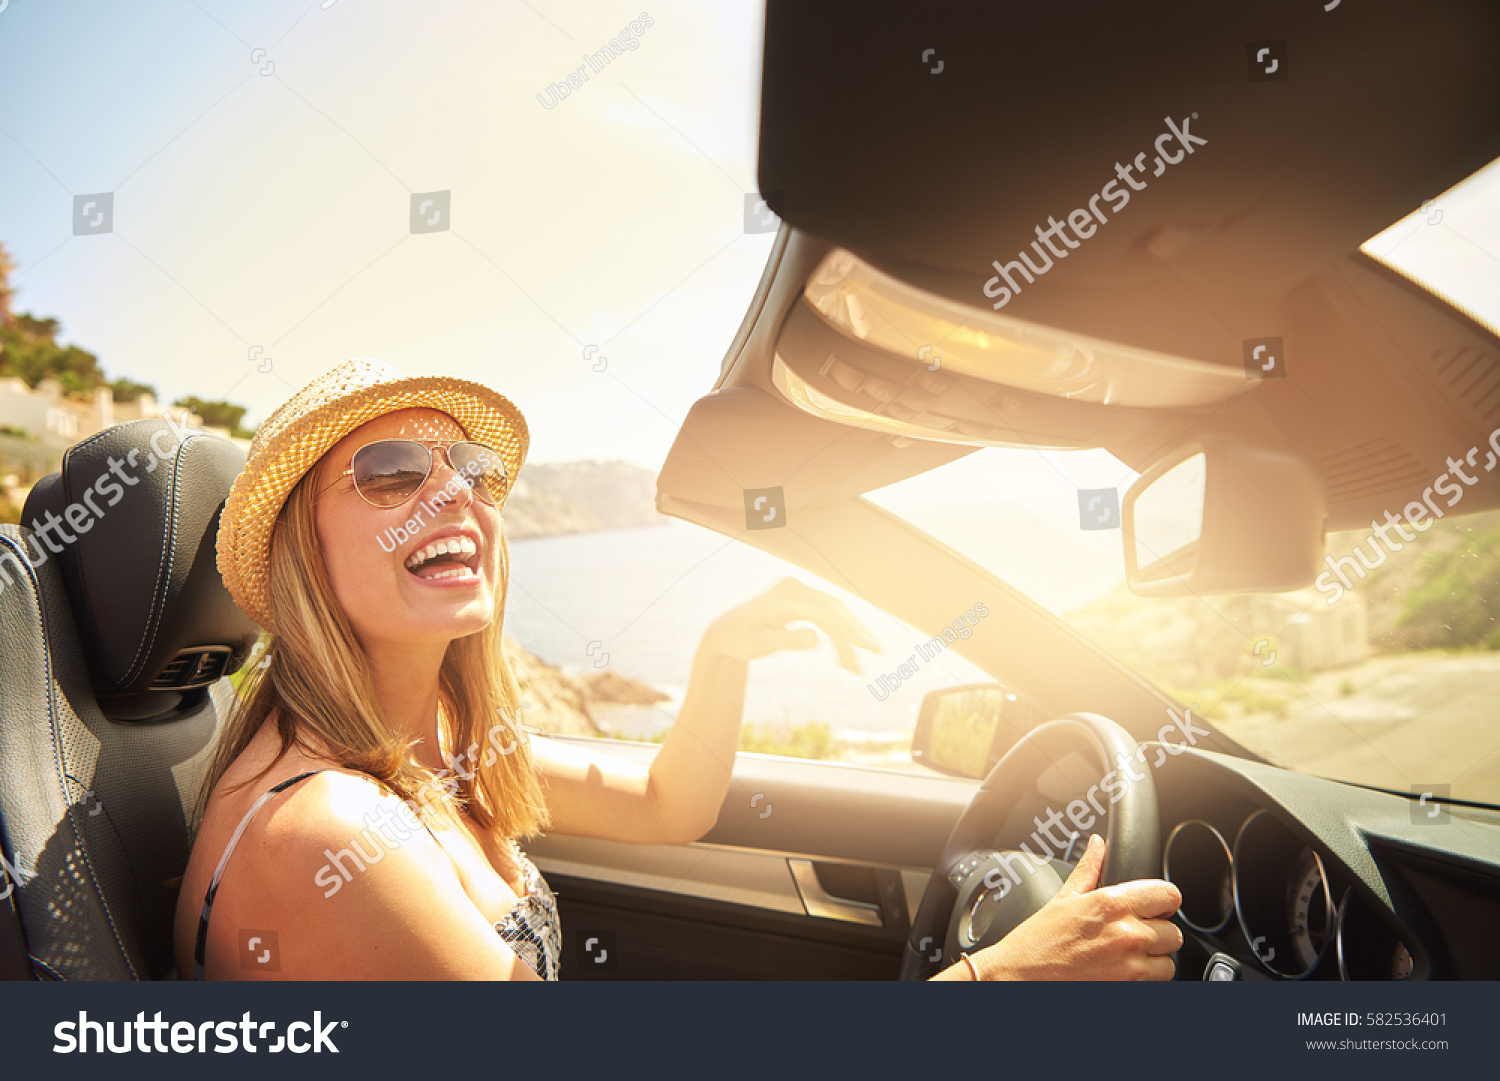 Single laughing young woman with hat and sunglasses driving her convertible top automobile on bright sunny day #582536401